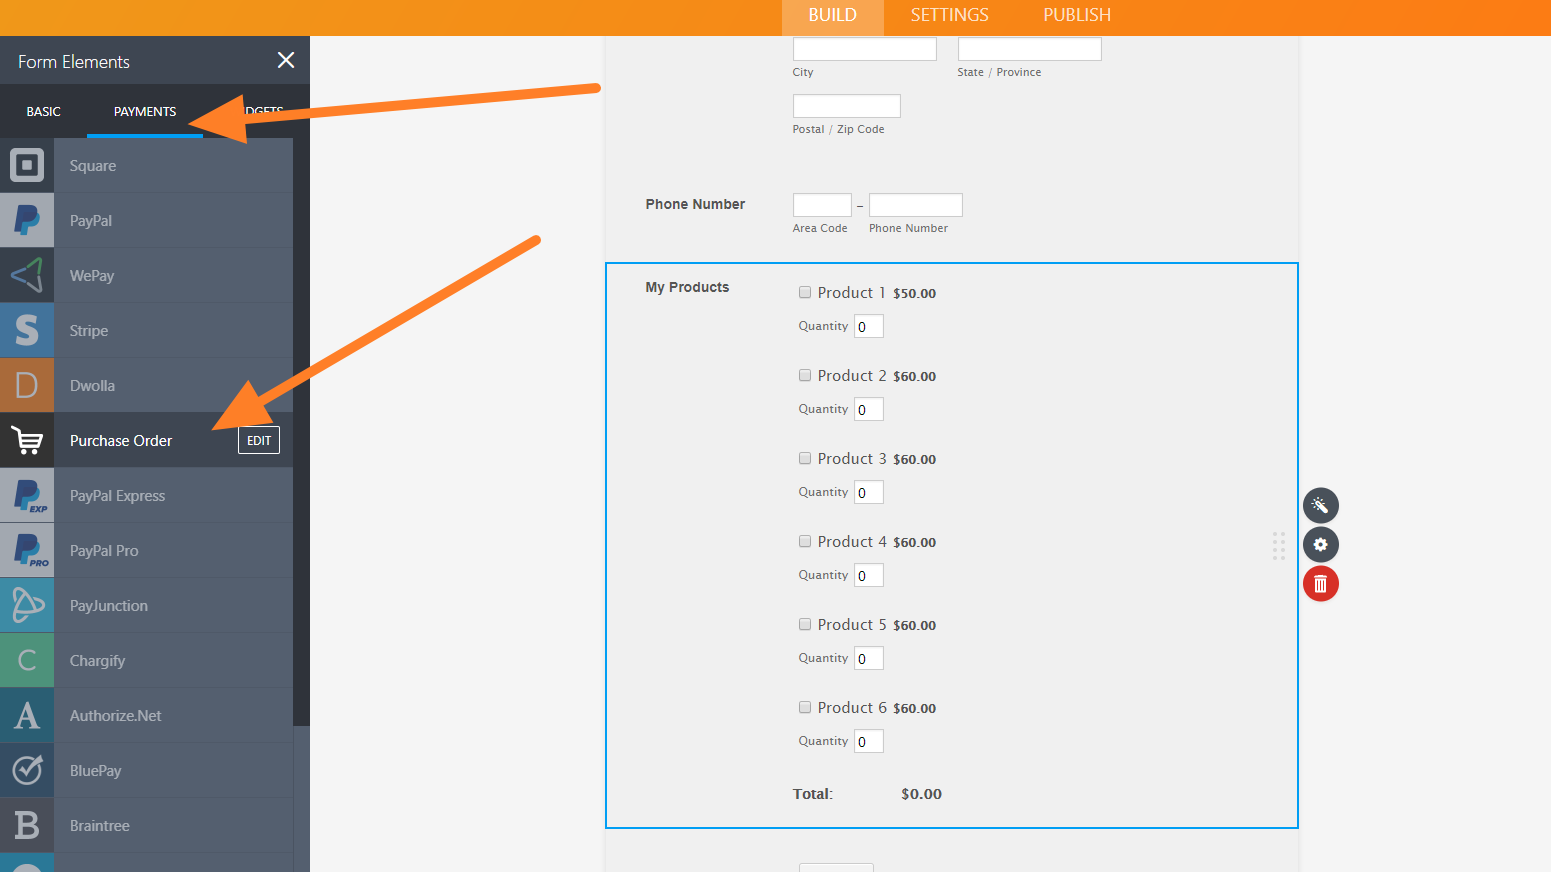 Purchase Order submission is not showing the quantity and correct total amount Image 1 Screenshot 20